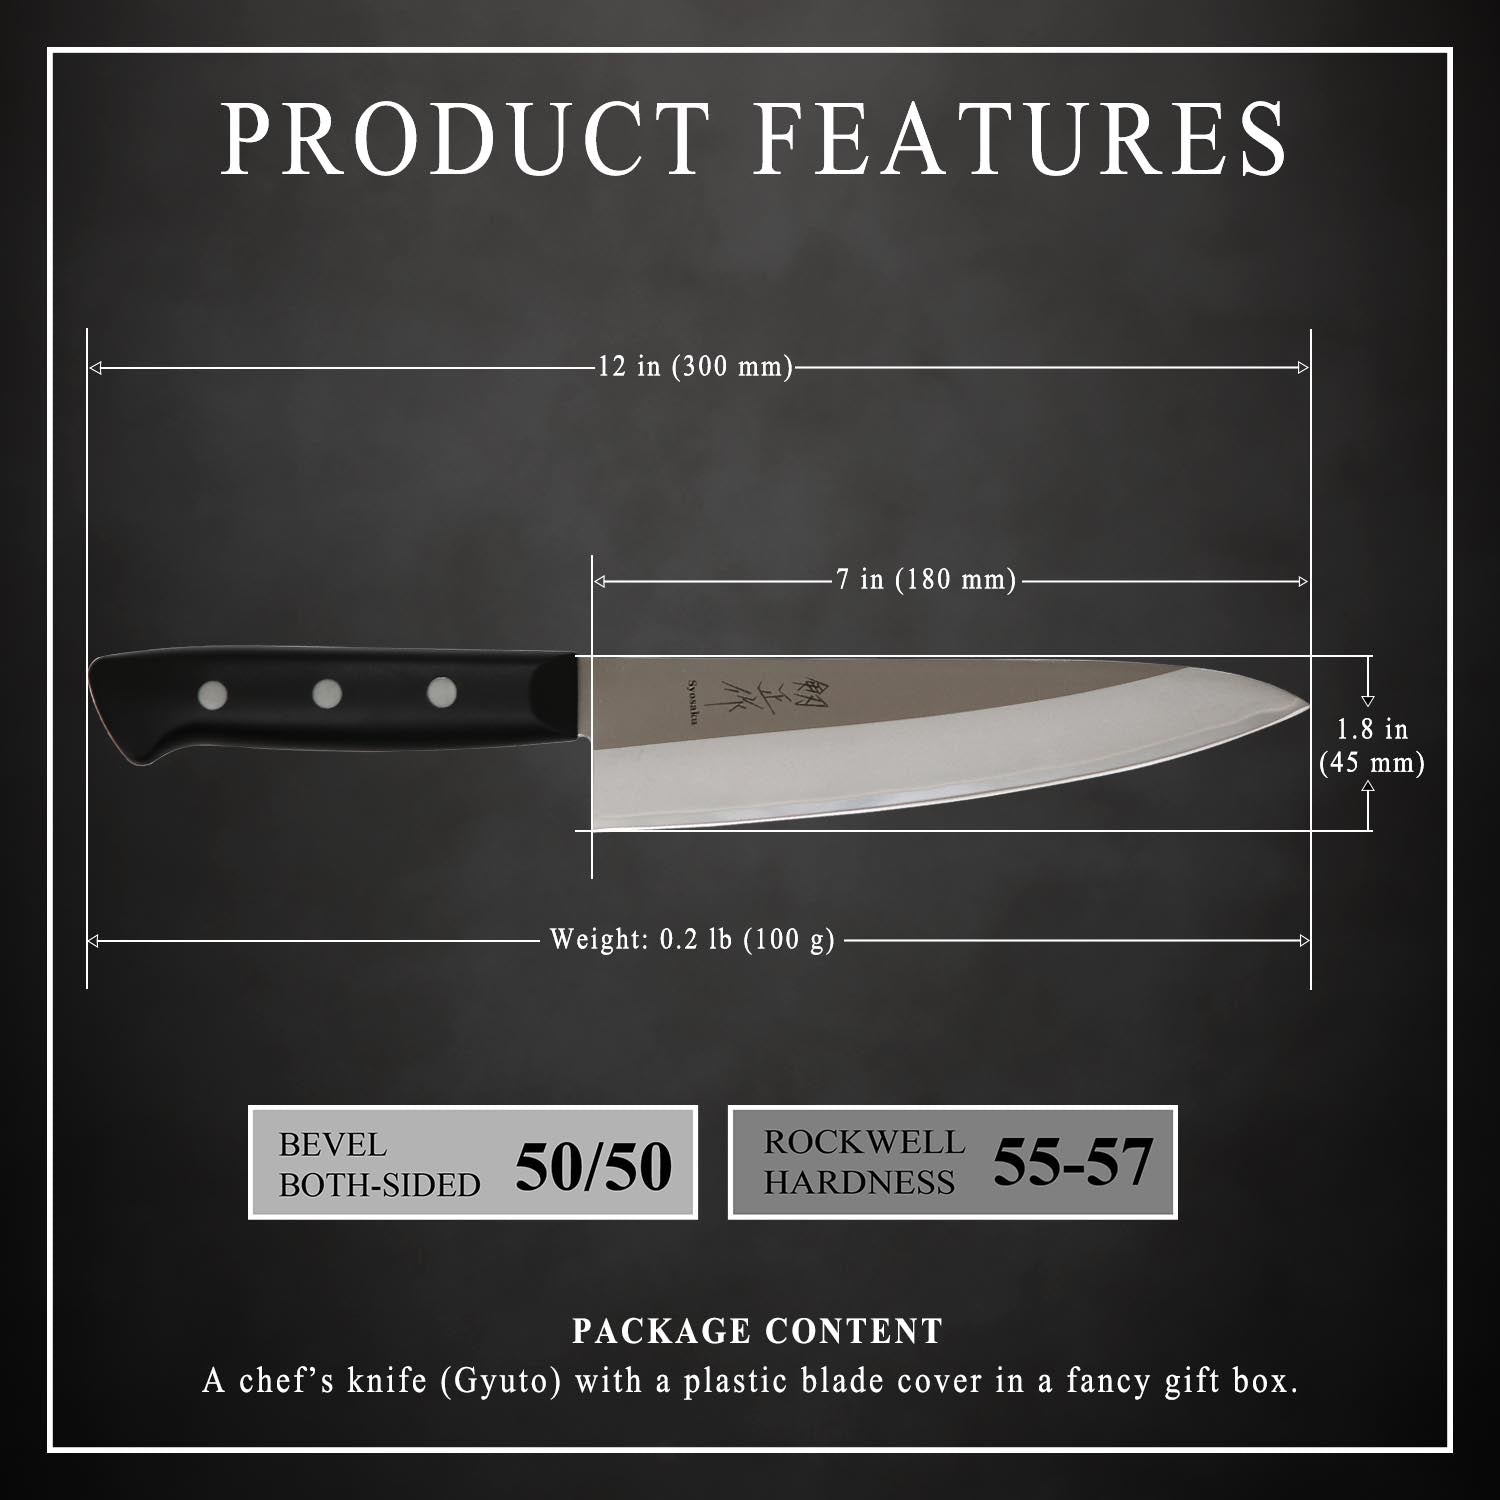 Buy Seki Cutlery Chopper Knife 14cm (140mm) Masahiro MV Black Plywood  MBS-26 Molybdenum Vanadium Laminated Reinforced Wood Handle Double-edged  knife for chopping large pieces of meat along with the bone like a